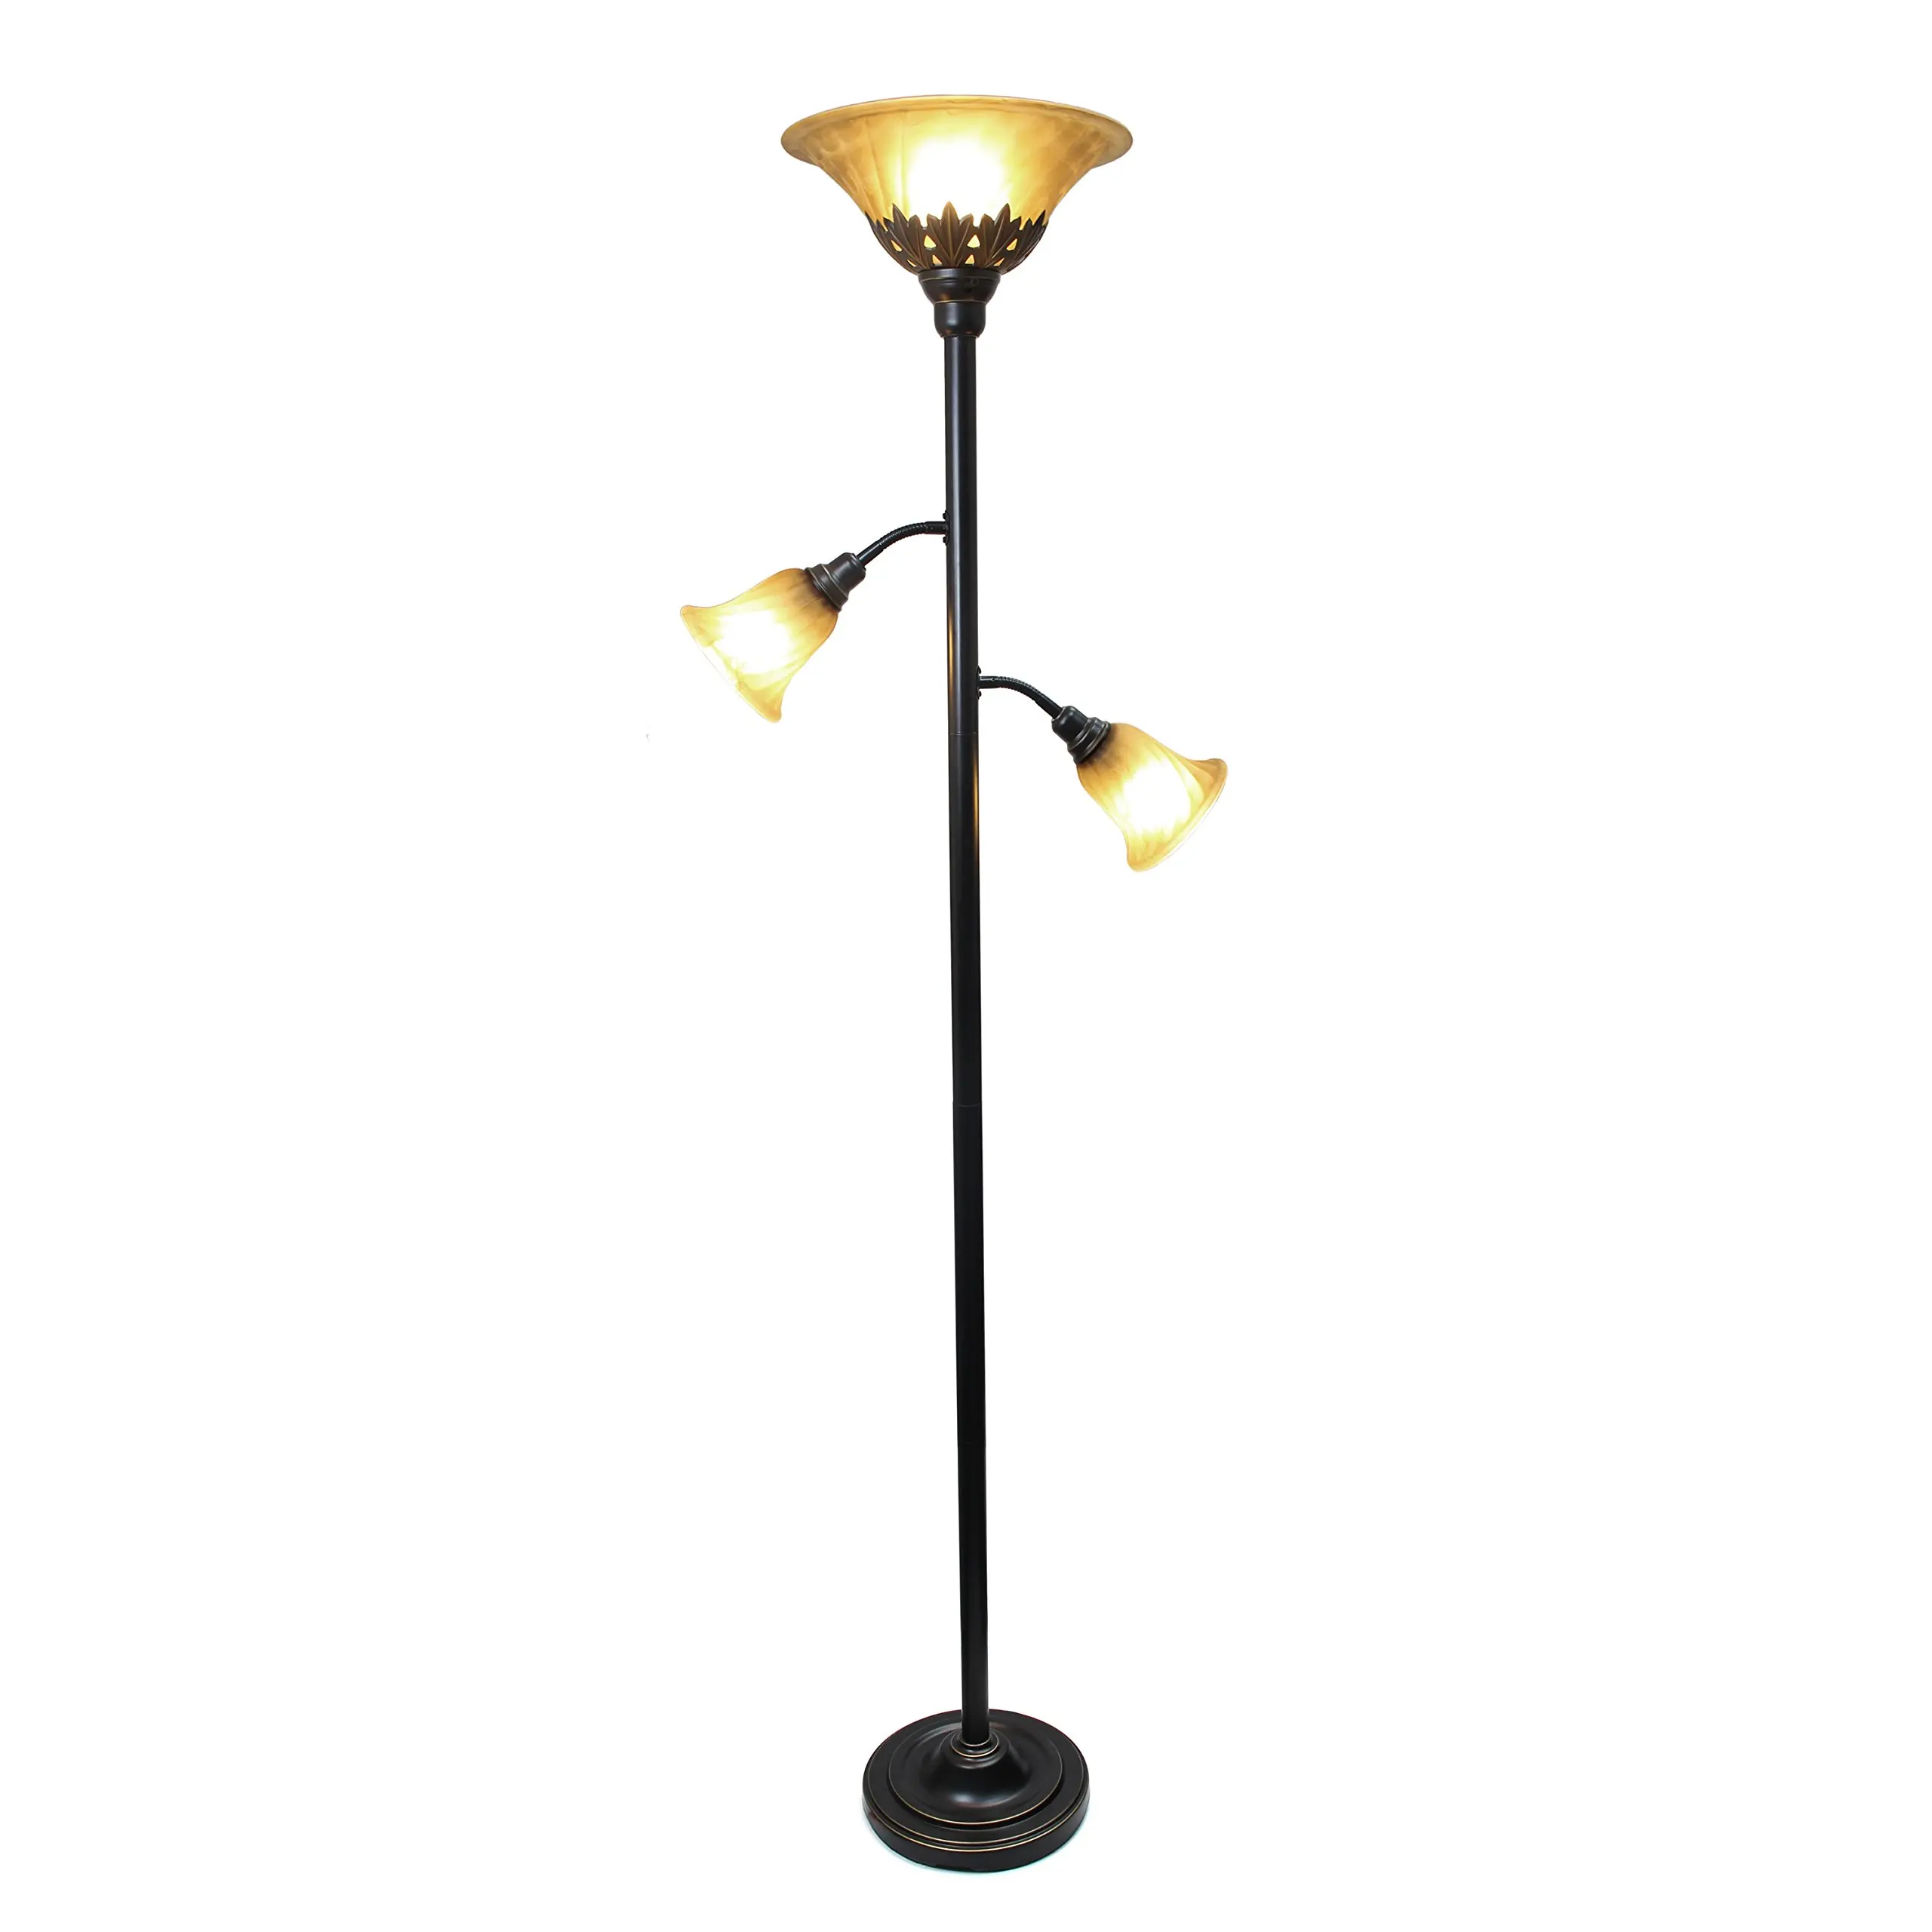 Cheap Glass Floor Lamp Shades Replacement Find Glass Floor Lamp